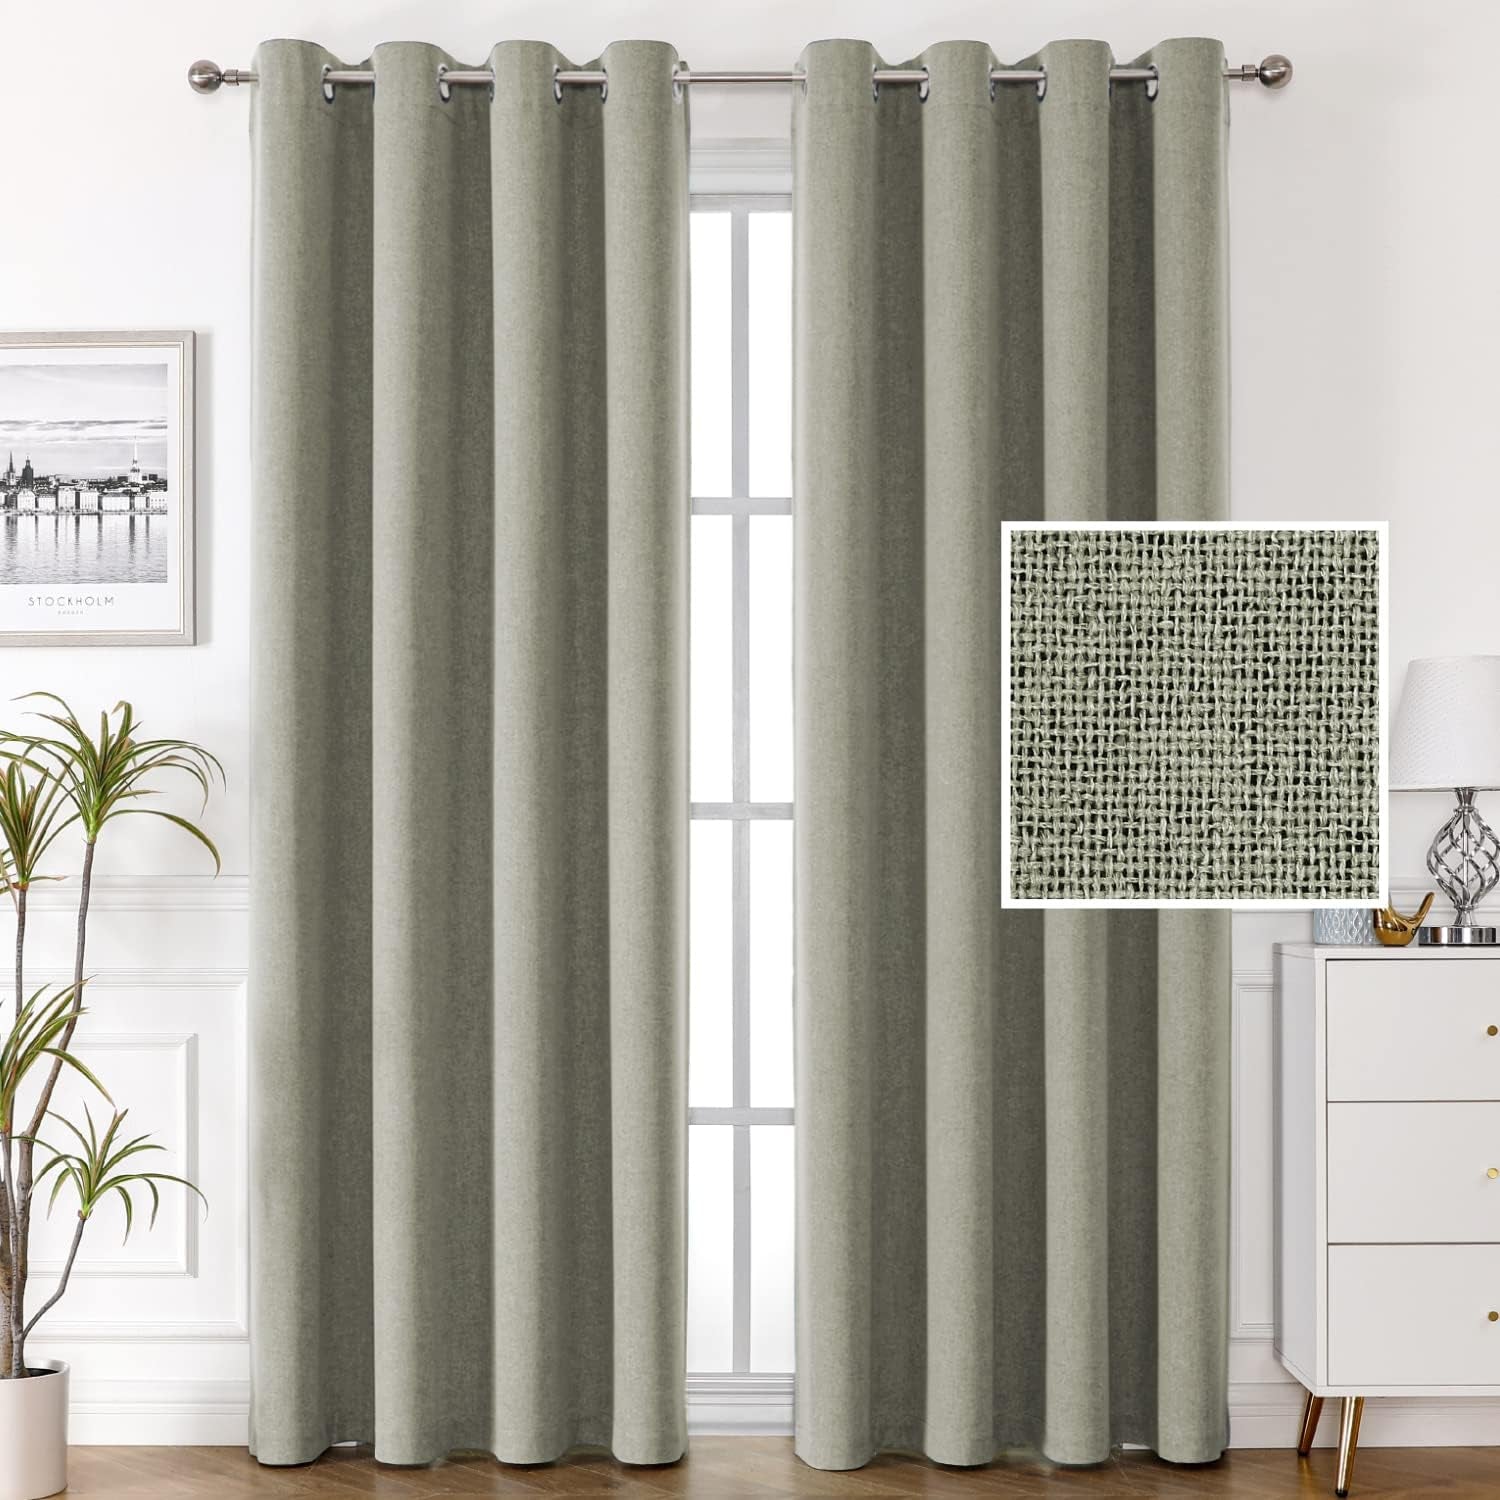 H.VERSAILTEX 100% Blackout Linen Look Curtains Thermal Insulated Curtains for Living Room Textured Burlap Drapes for Bedroom Grommet Linen Noise Blocking Curtains 42 X 84 Inch, 2 Panels - Sage  H.VERSAILTEX Sage 52"W X 96"L 